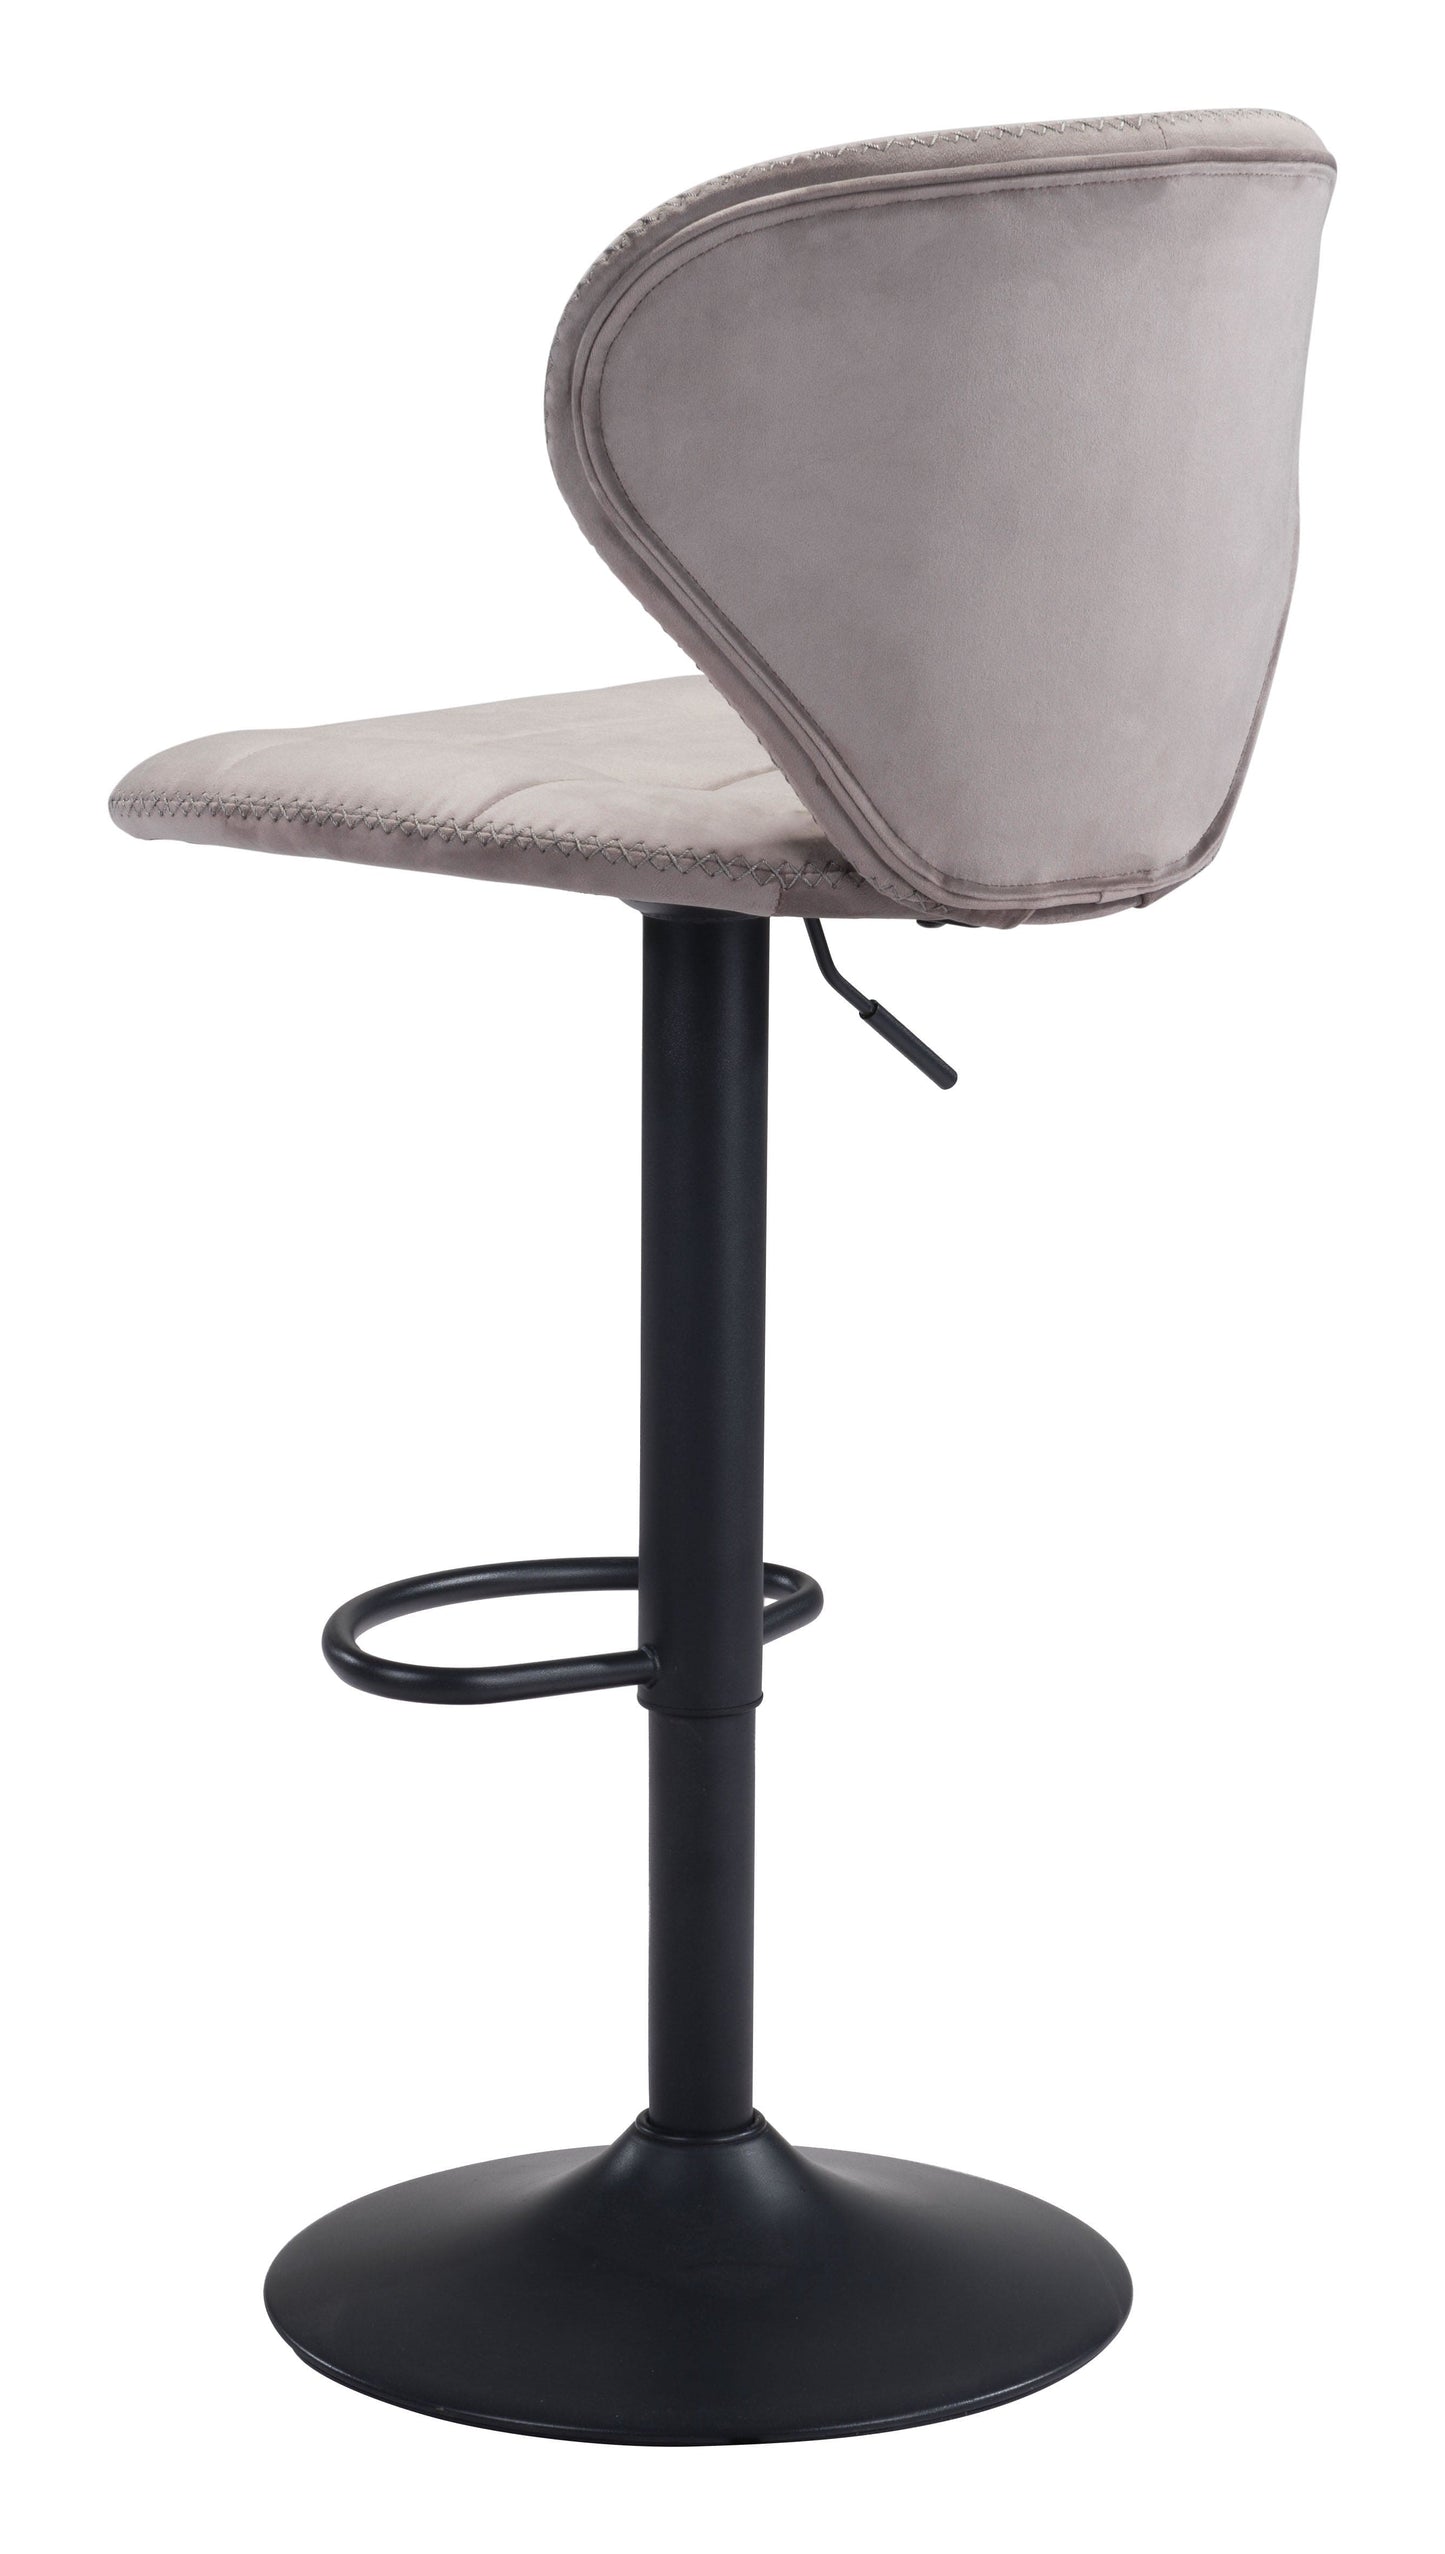 Angled Side View of Chair Showing Height Adjustment Lever